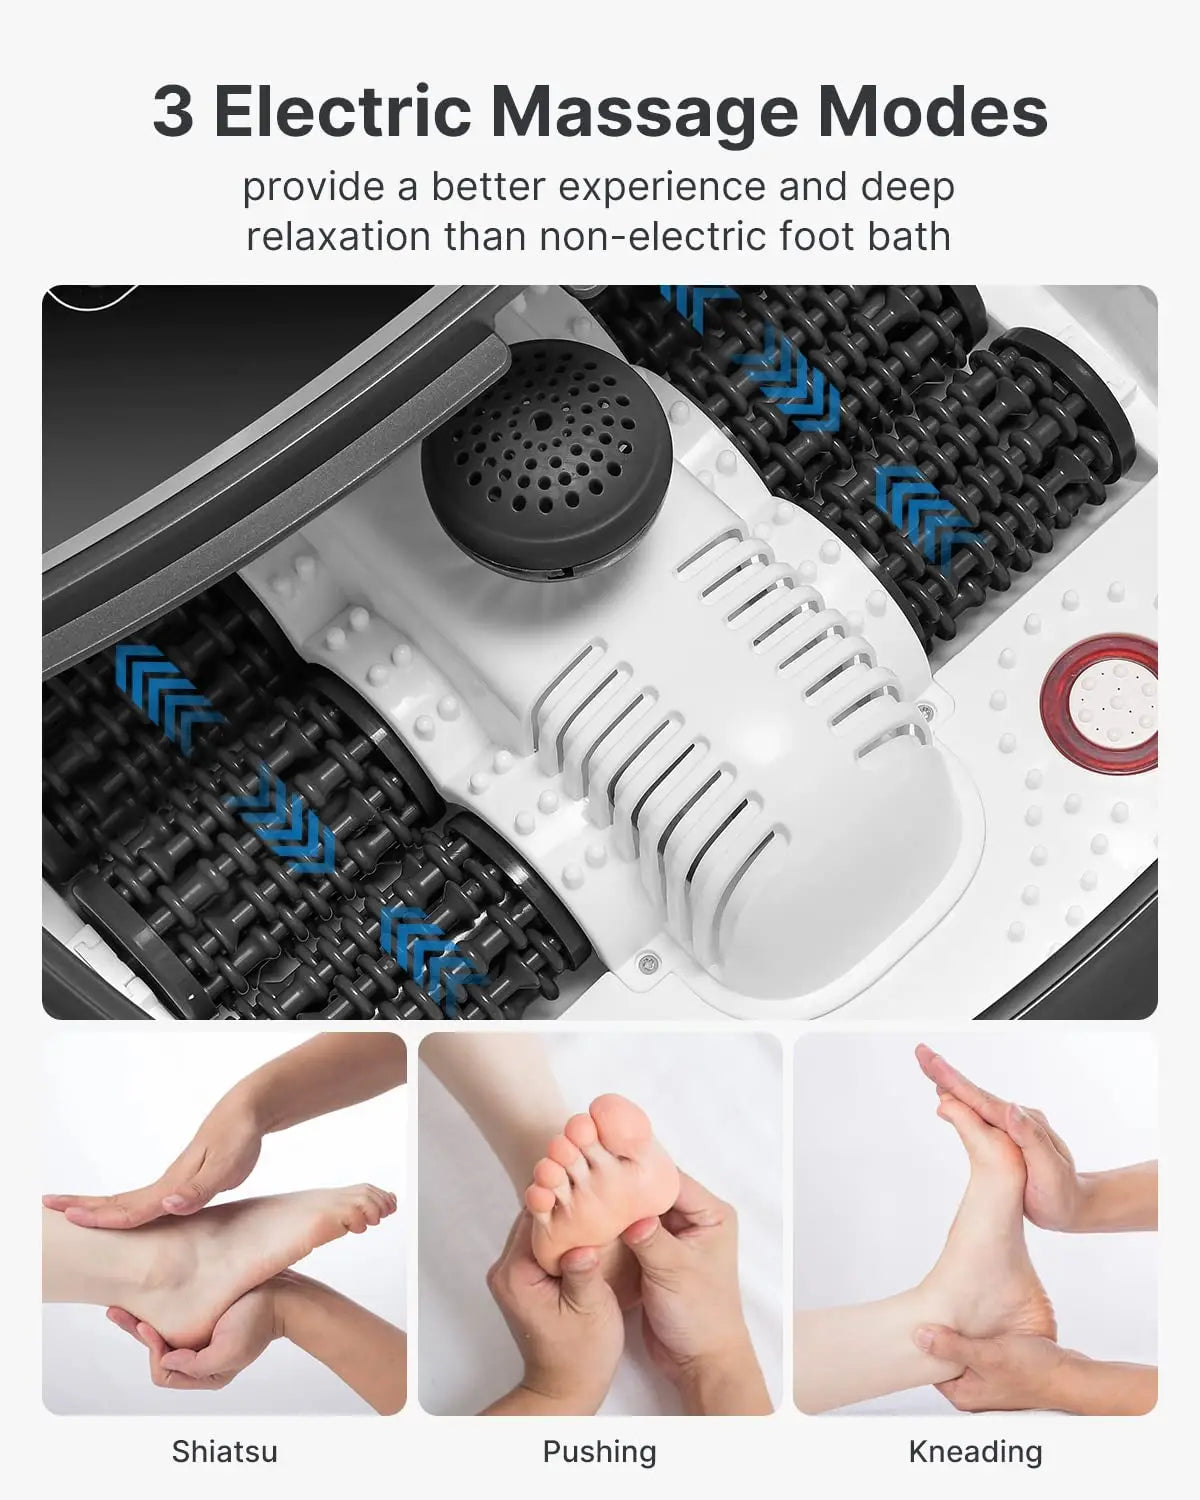 Image depicting the Renpho EU Foot Spa Massager with Fast Heating with text describing its features. The main image shows the interior of the foot spa with mechanical rollers and a bubble massager. Below are three smaller images showcasing different massage techniques: Shiatsu, Pushing, and Kneading. Text: "3 Electric Massage Modes." This advanced foot massage machine also features a PTC heater for optimal warmth and comfort.